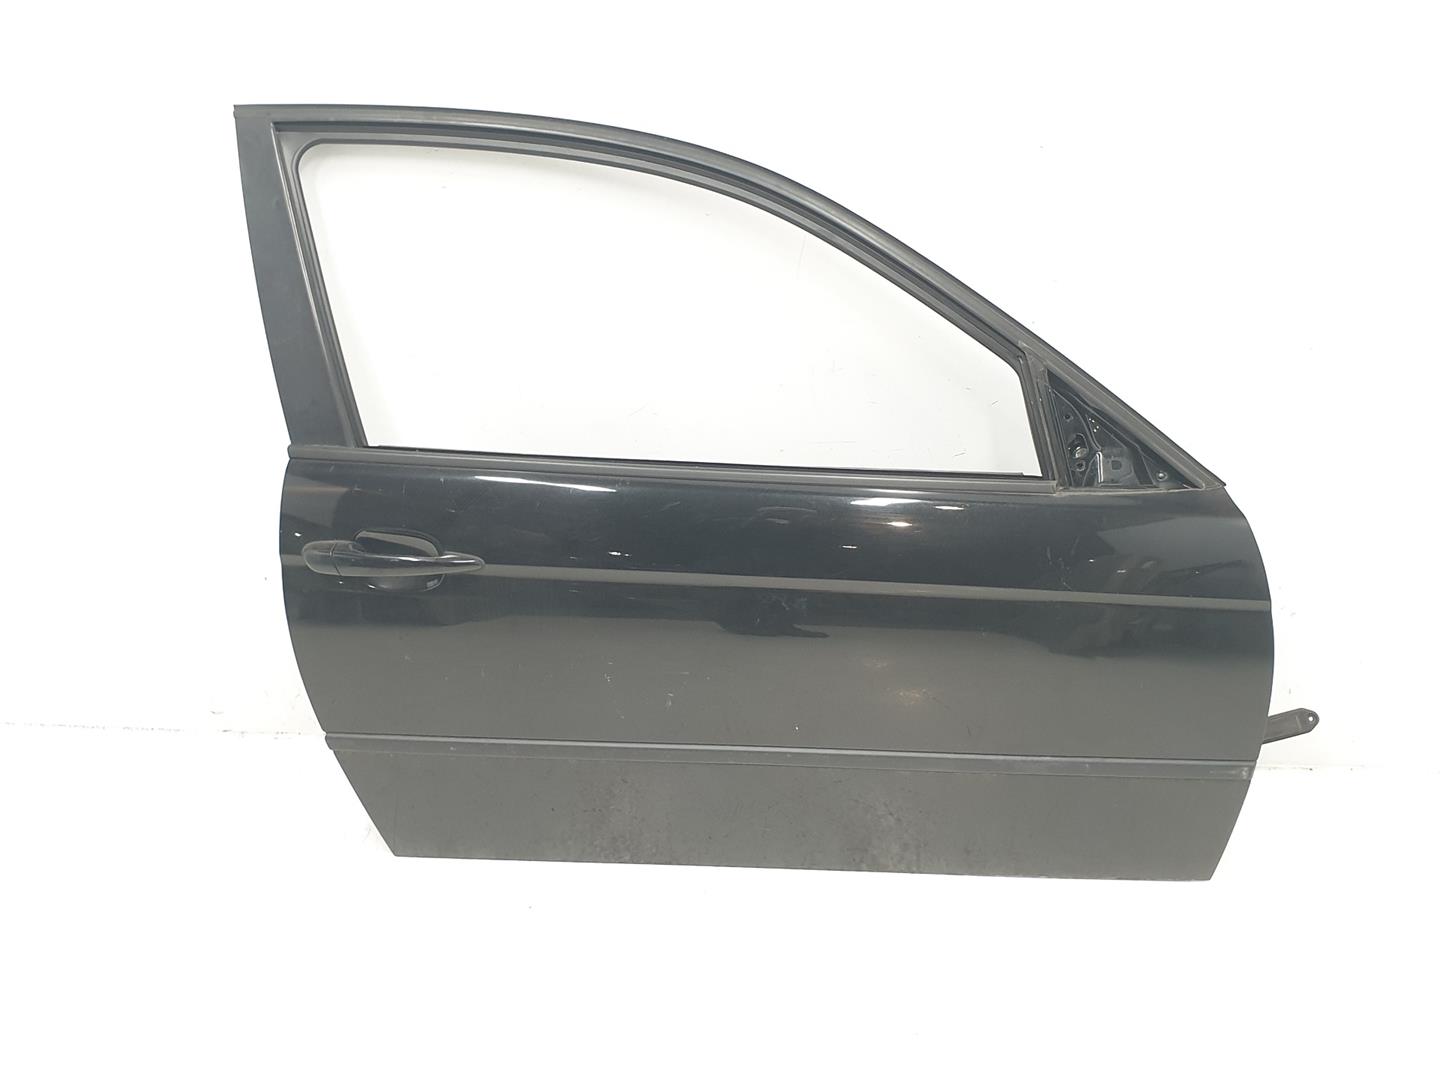 BMW 3 Series E46 (1997-2006) Front Right Door 41517016240, 41517016240, COLORNEGRO475 24212995